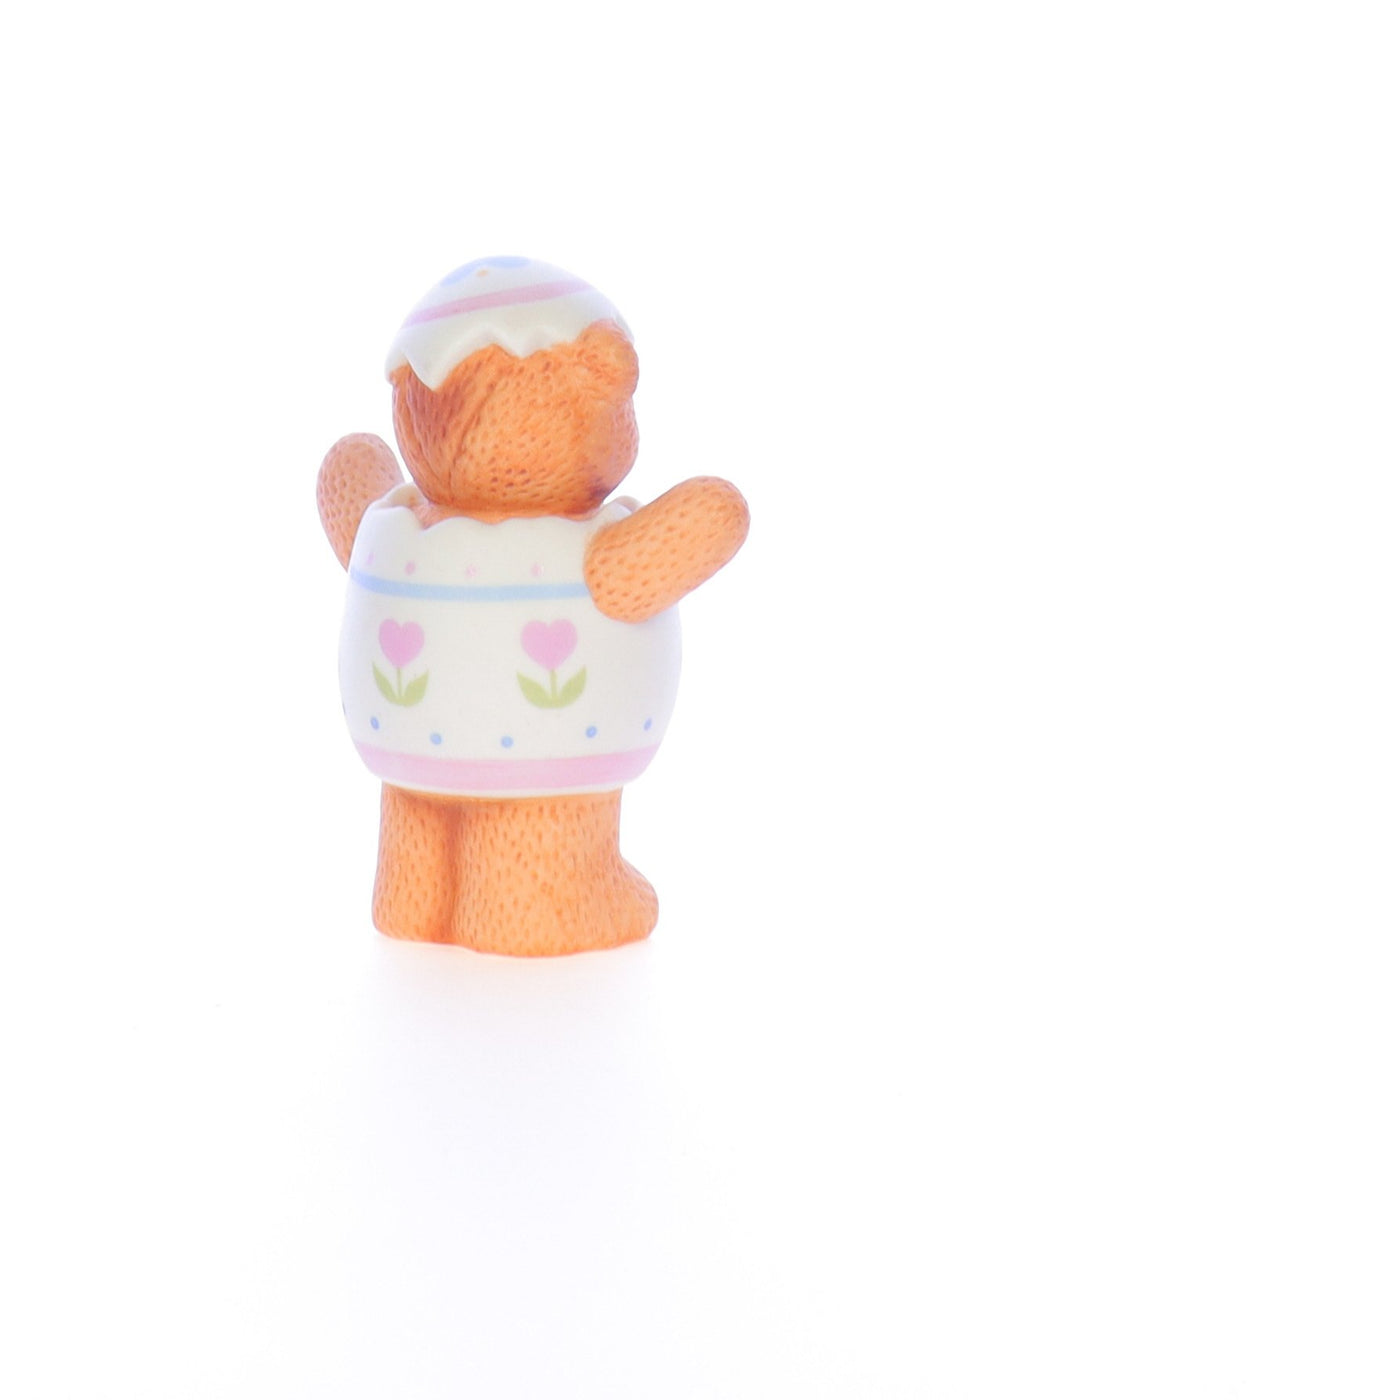 Lucy_And_Me_by_Lucy_Atwell_Porcelain_Figurine_Bear_in_Easter_Egg_Costume_Lucy_Unknown_056_06